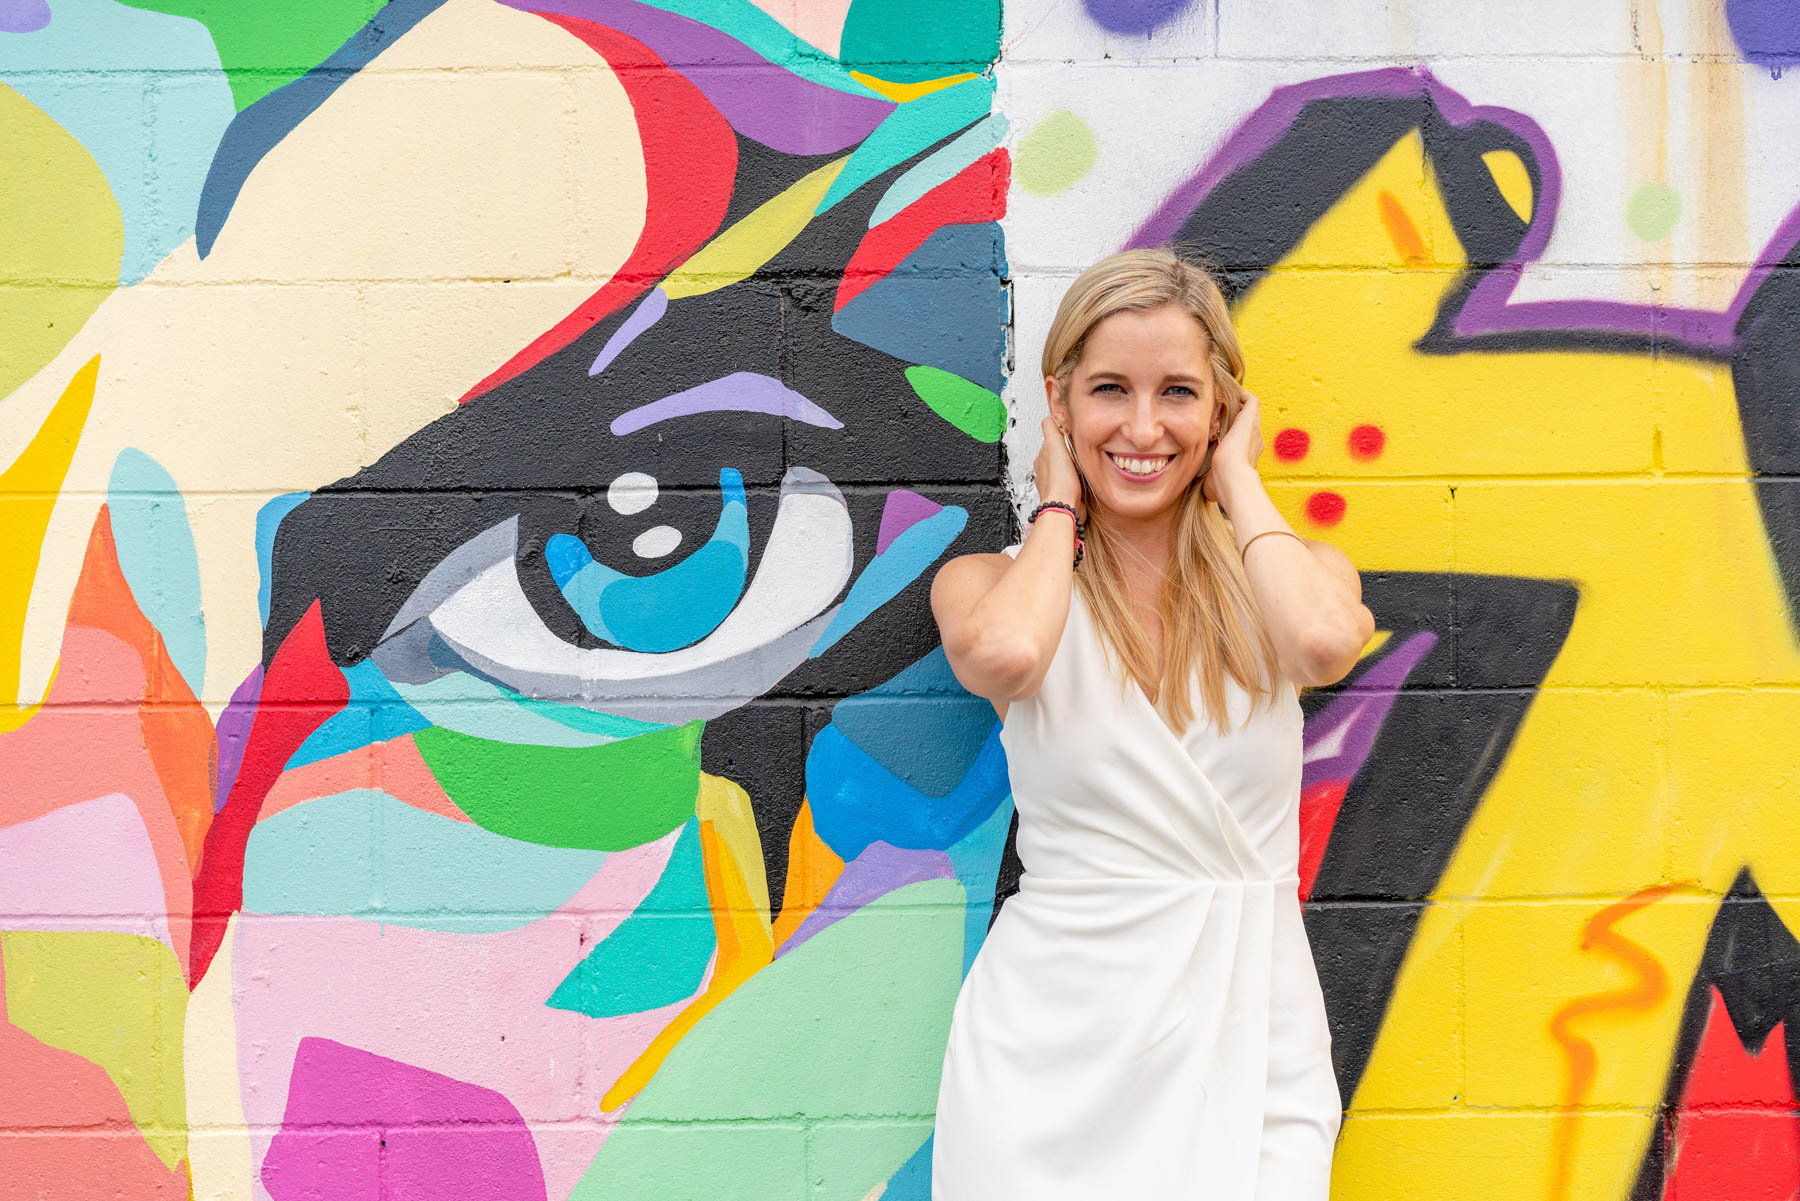 Woman in a white dress posing in front of a graffiti mural wall